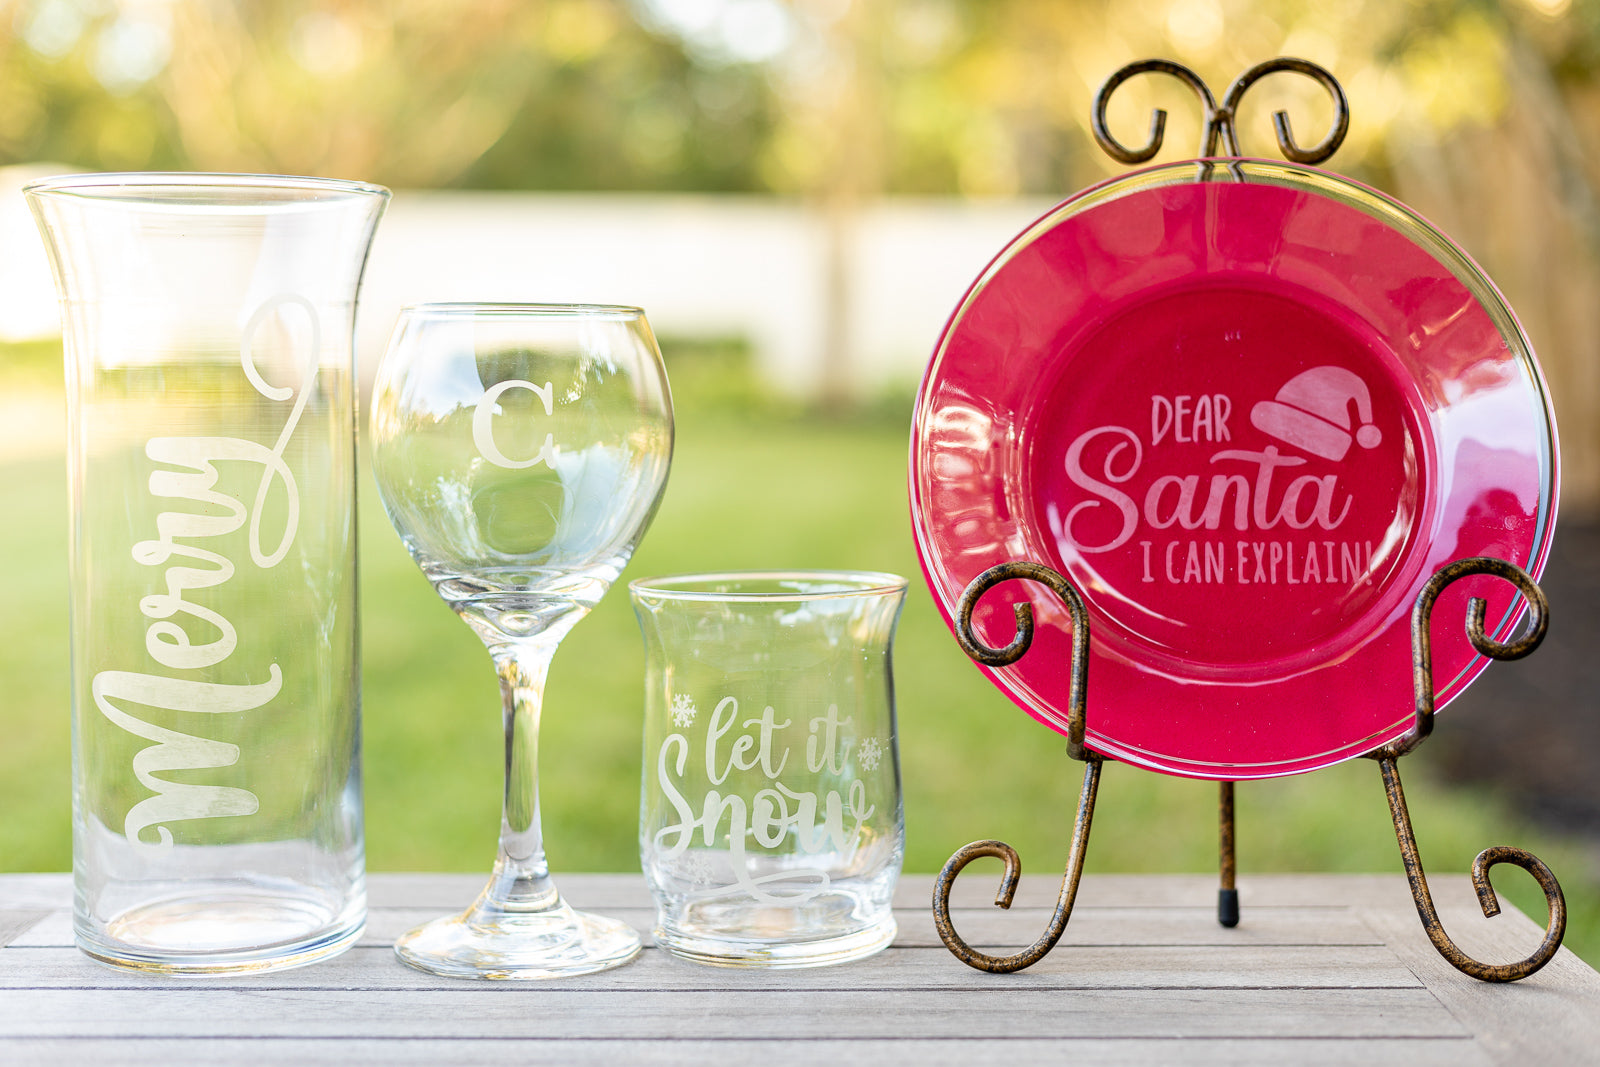 Various glass dishes with glass etching Christmas phrases